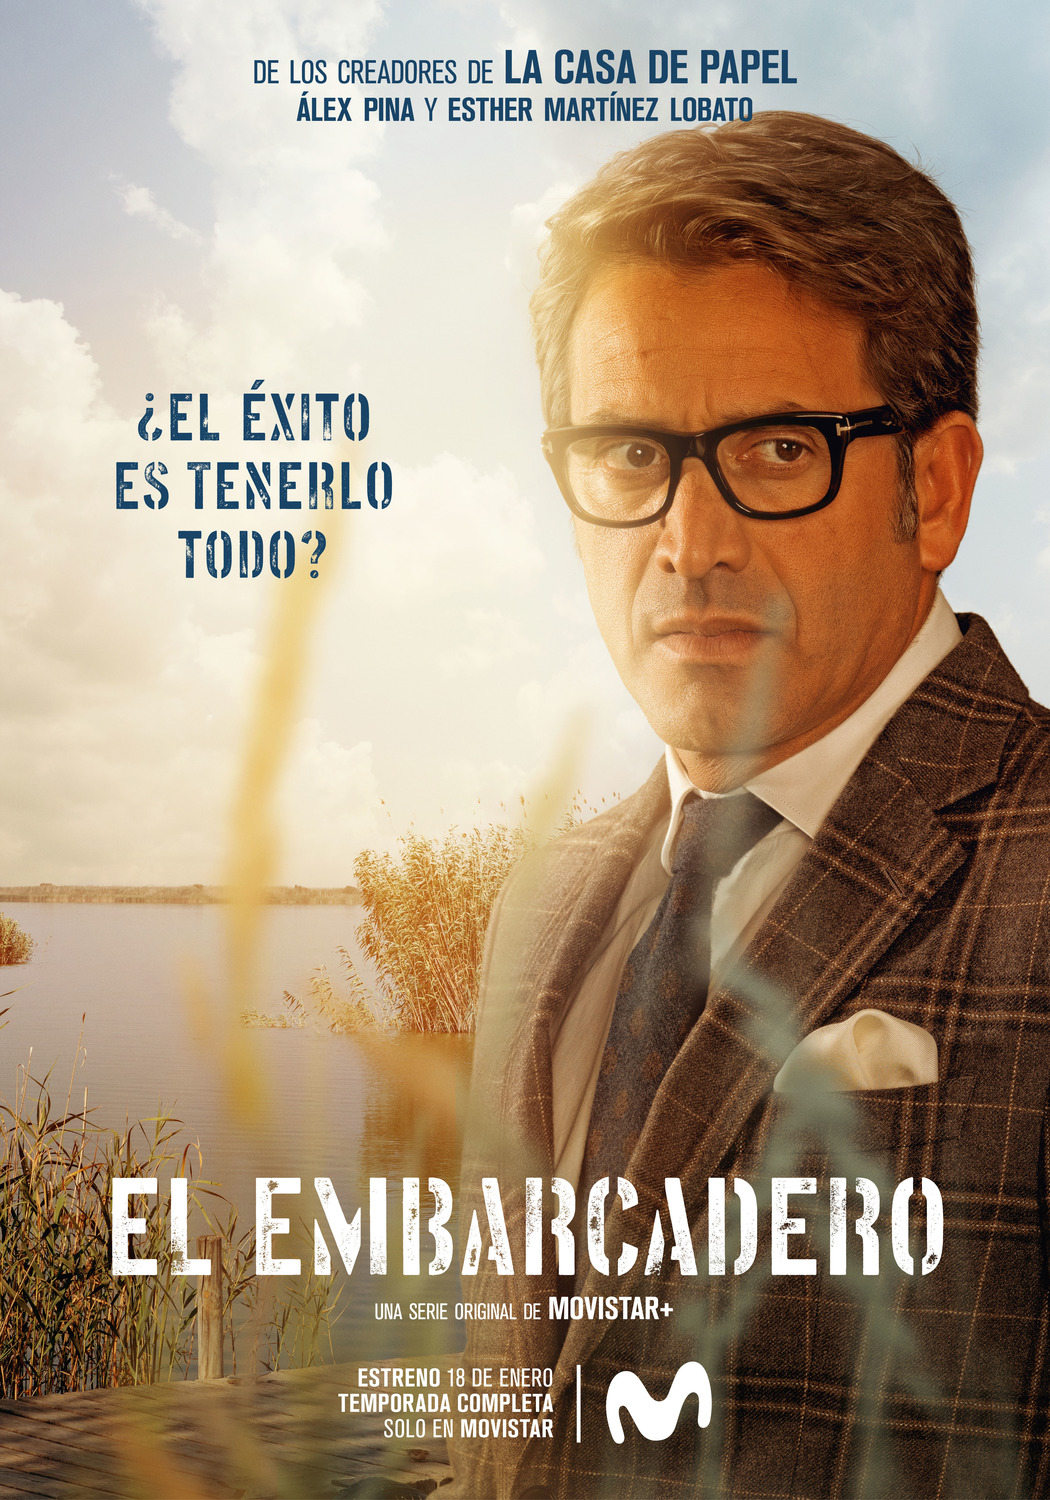 Extra Large TV Poster Image for El embarcadero (#5 of 16)